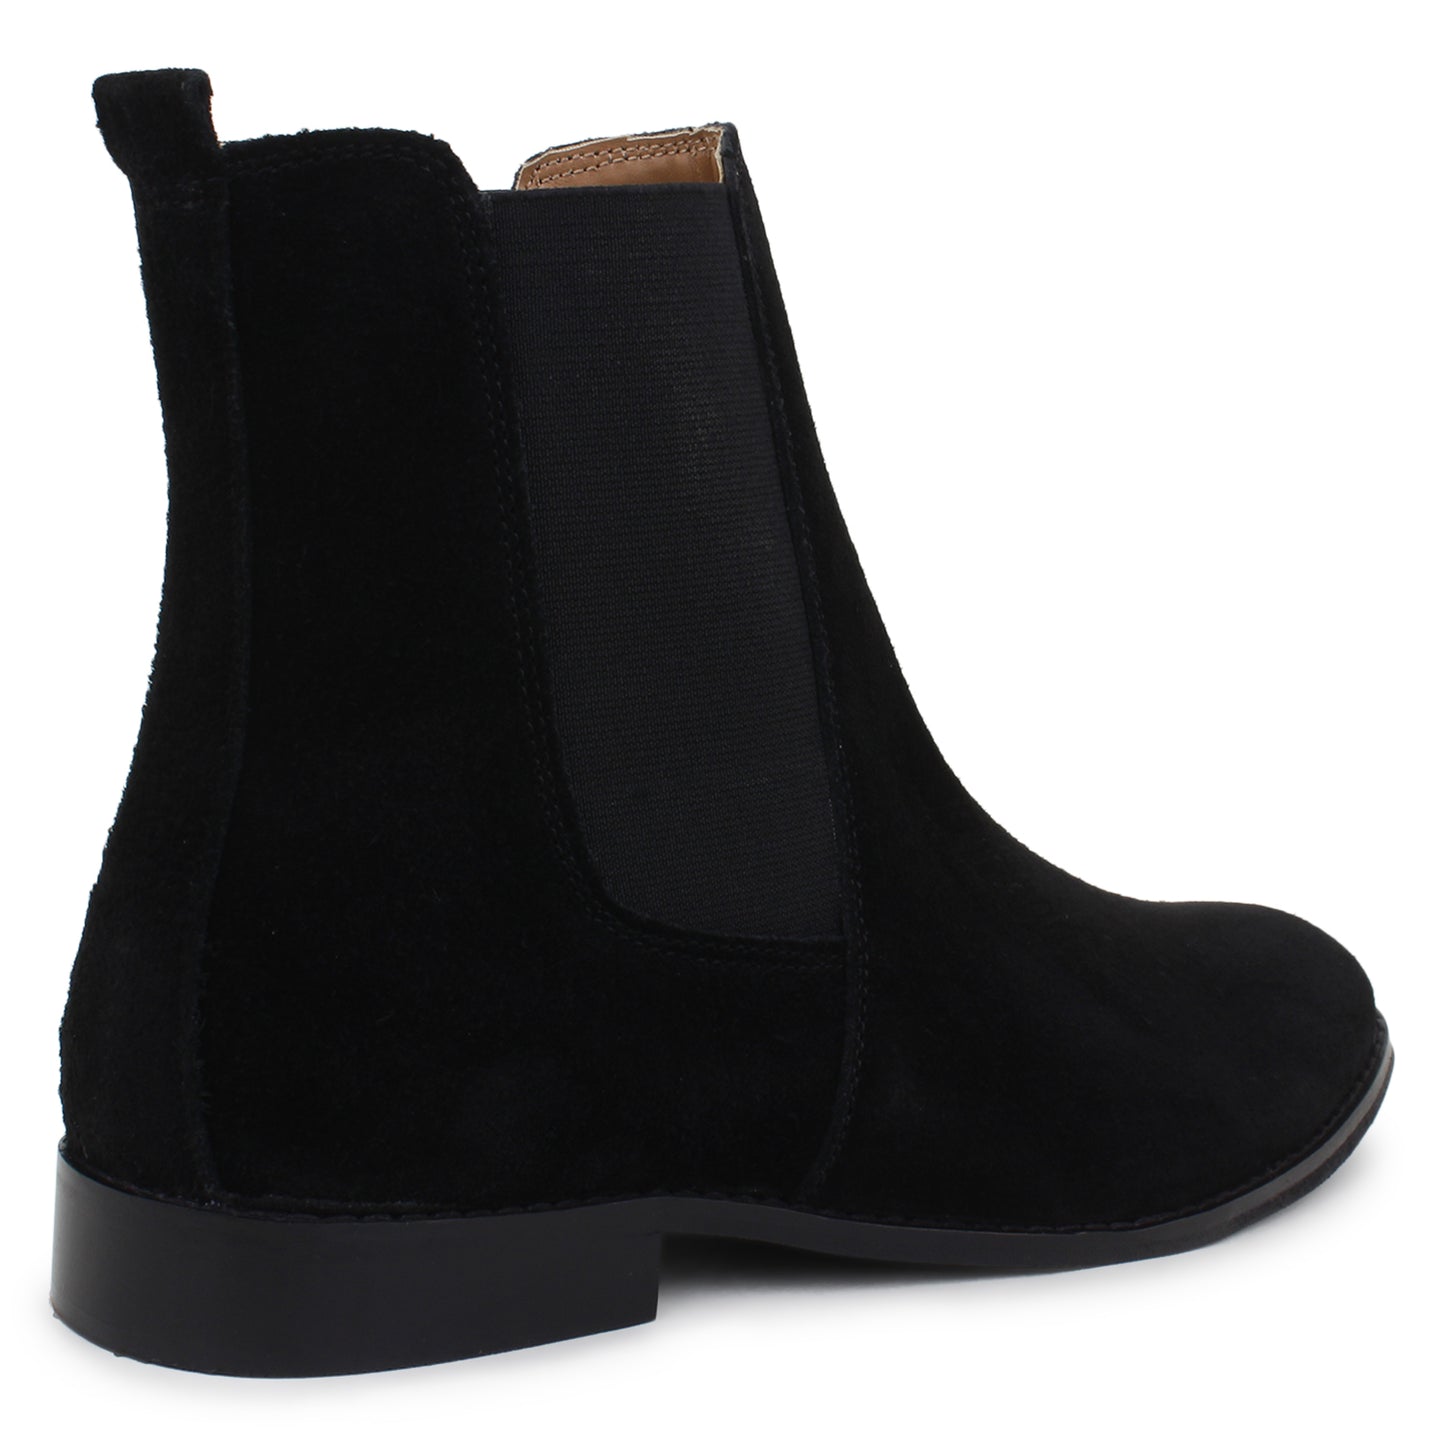 Italian Suede Leather Boots - Black